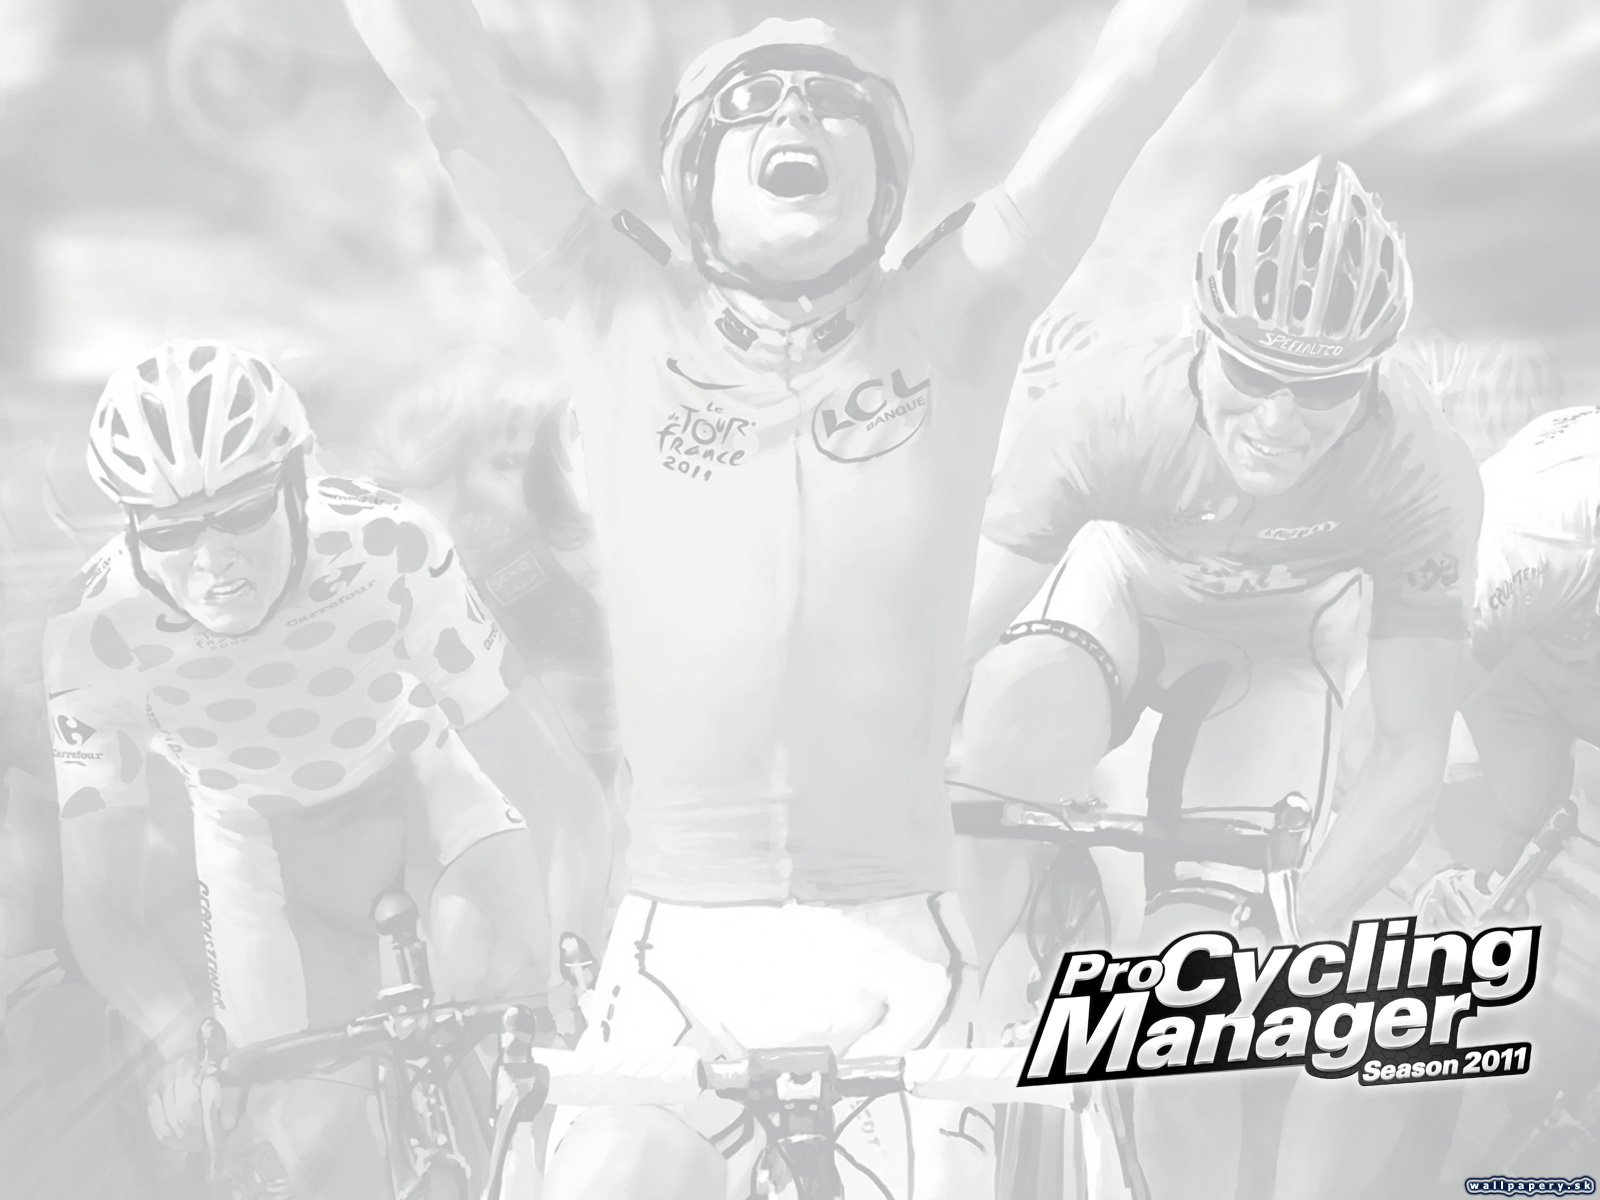 Pro Cycling Manager 2011 - wallpaper 2